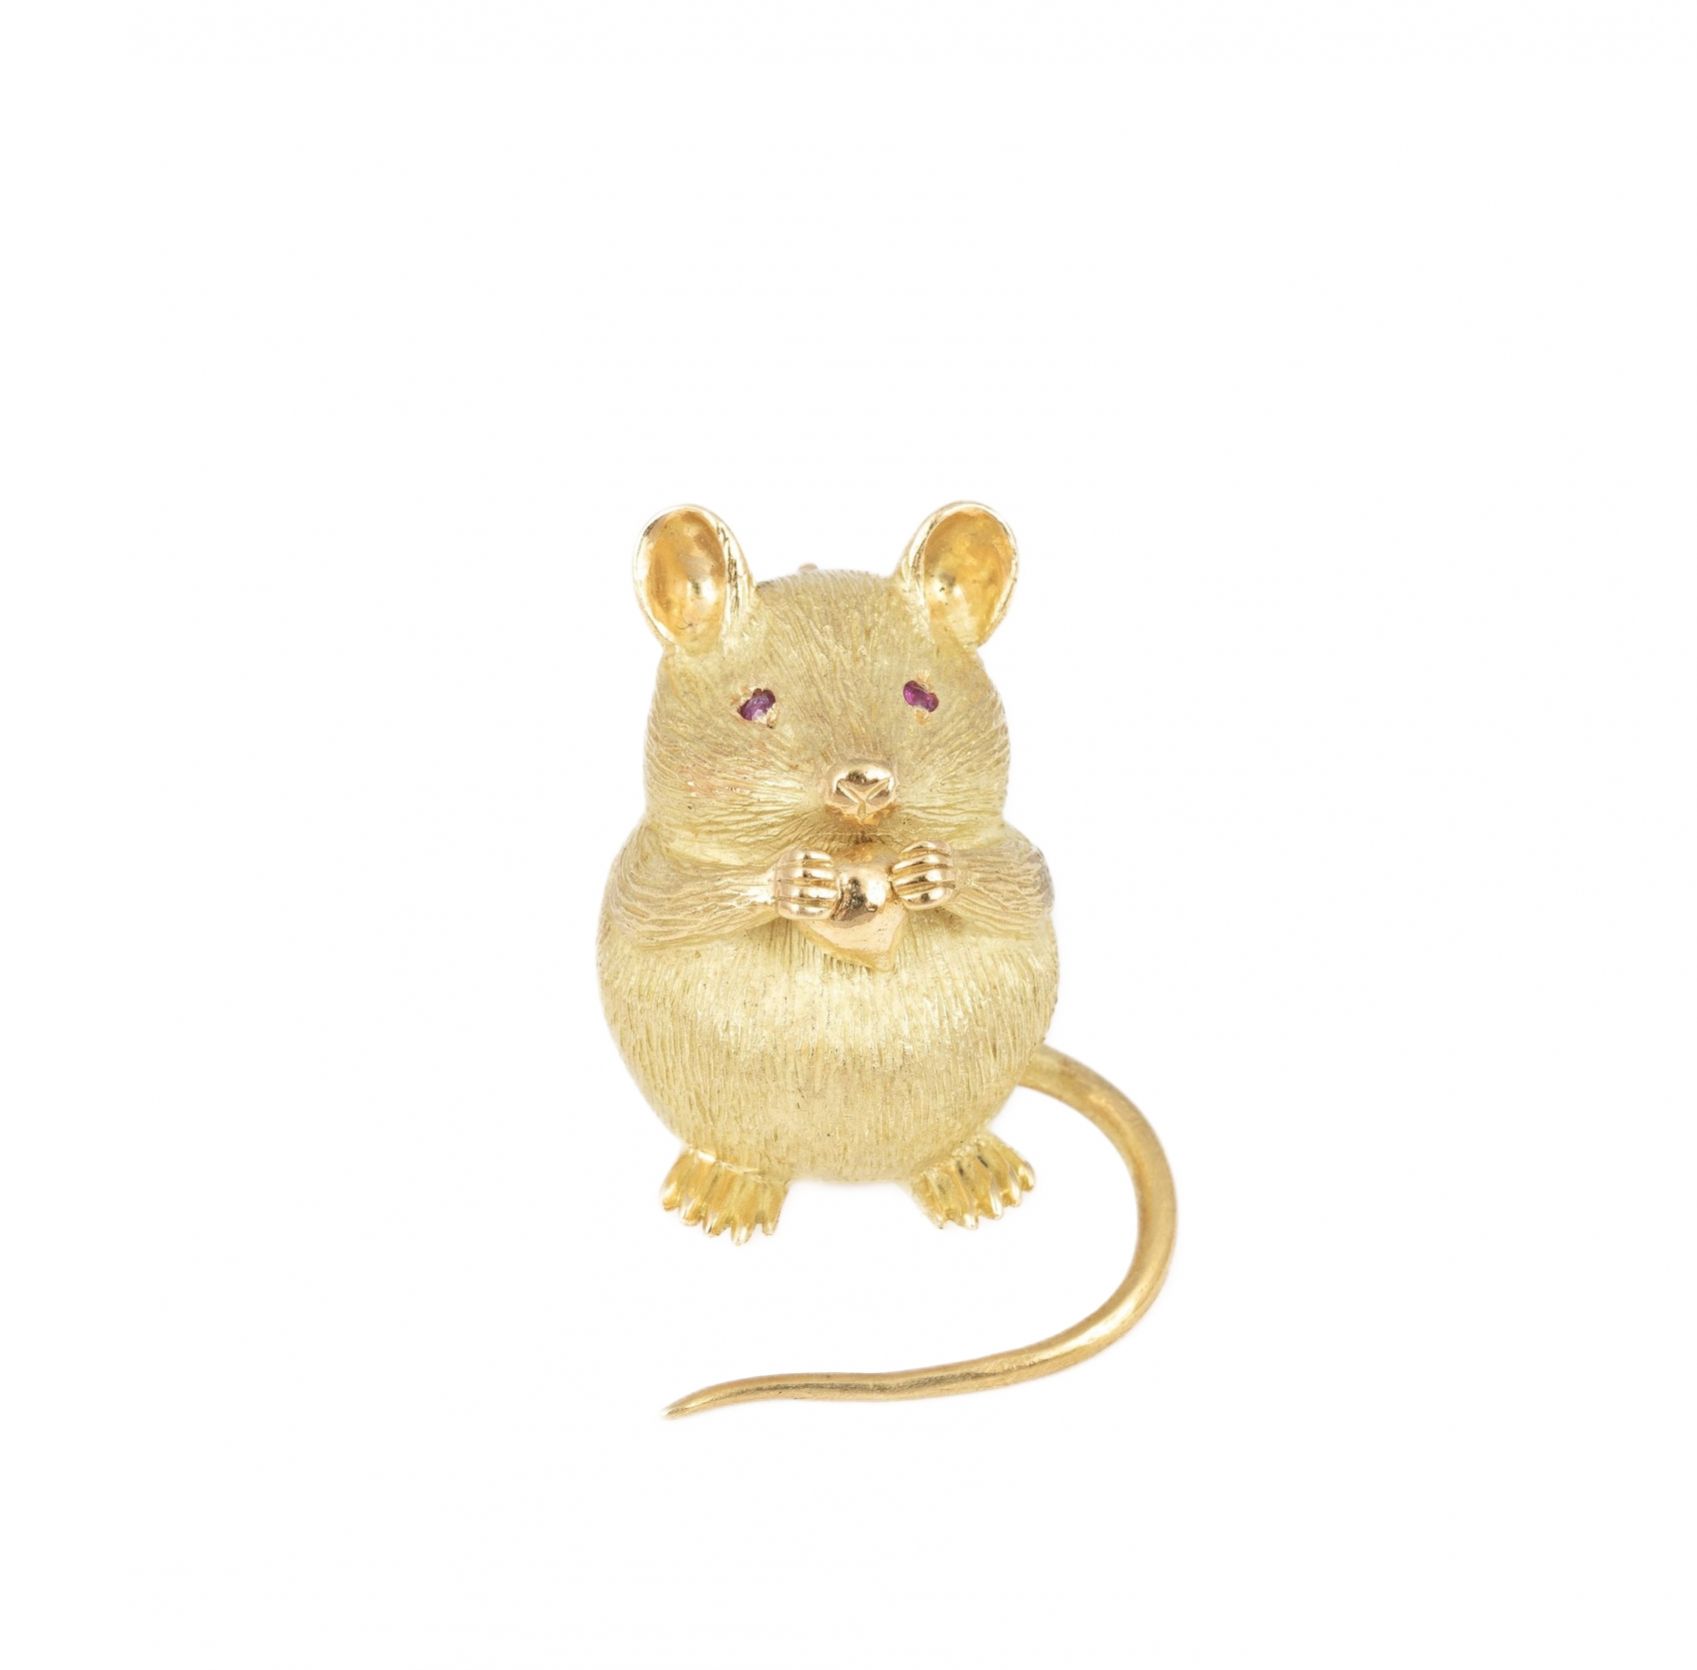 18K-yellow-gold-brooch-in-the-shape-of-a-mouse-holding-a-hazelnut